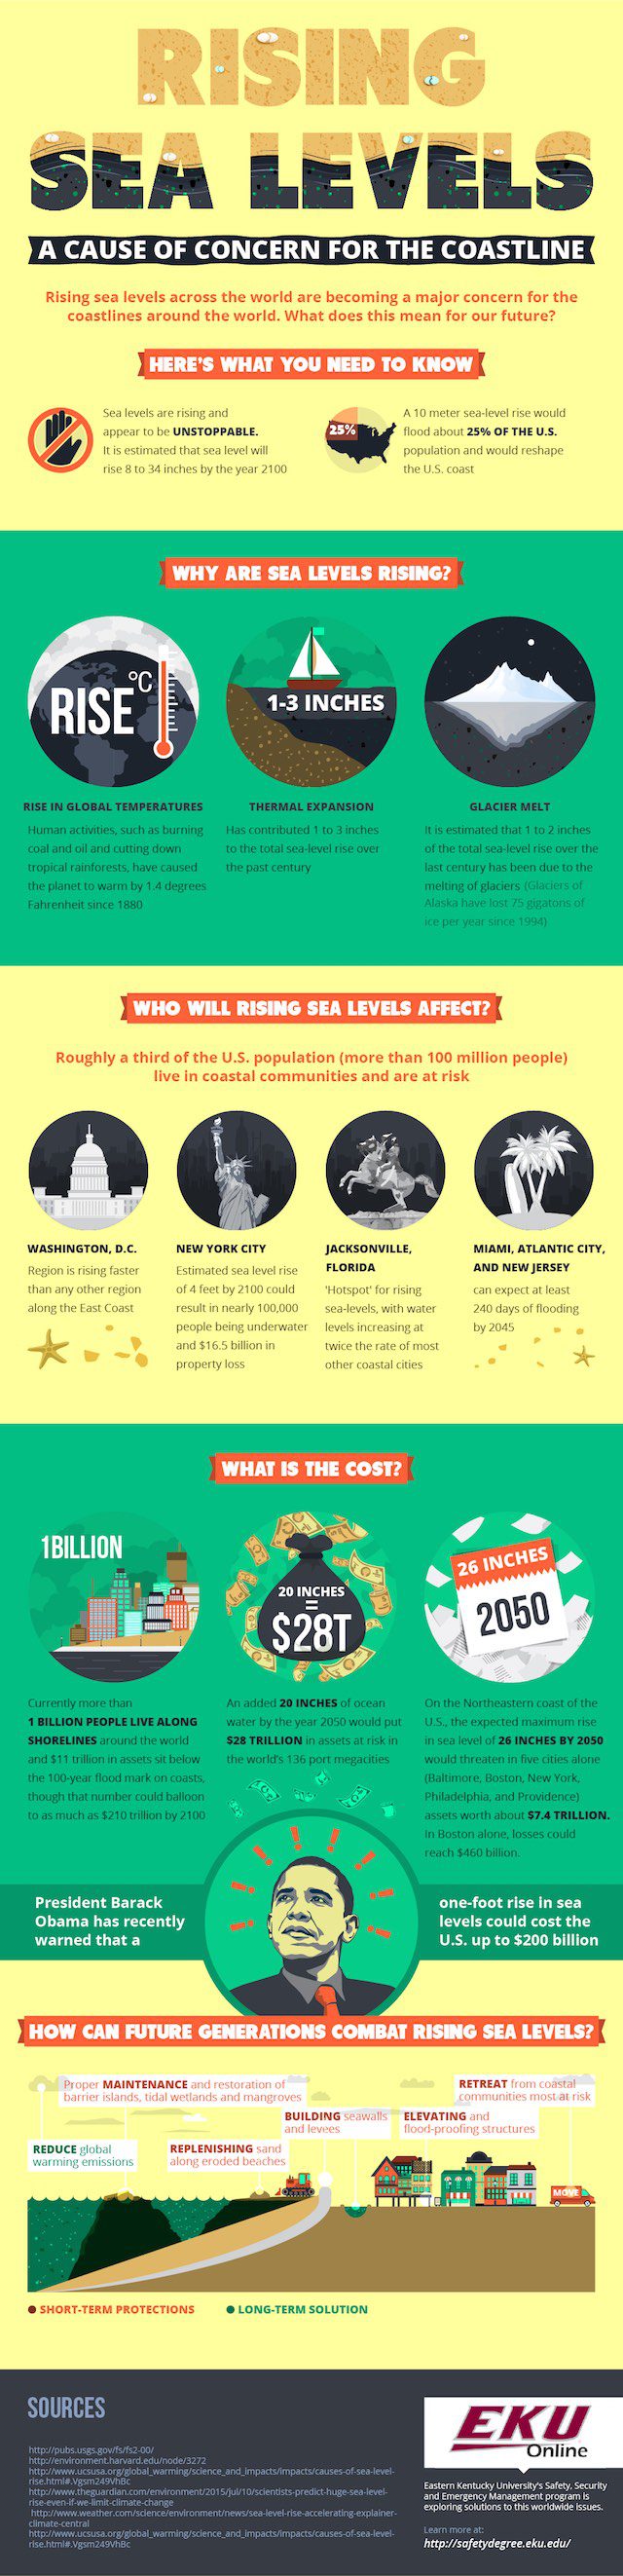 The impacts of rising seas